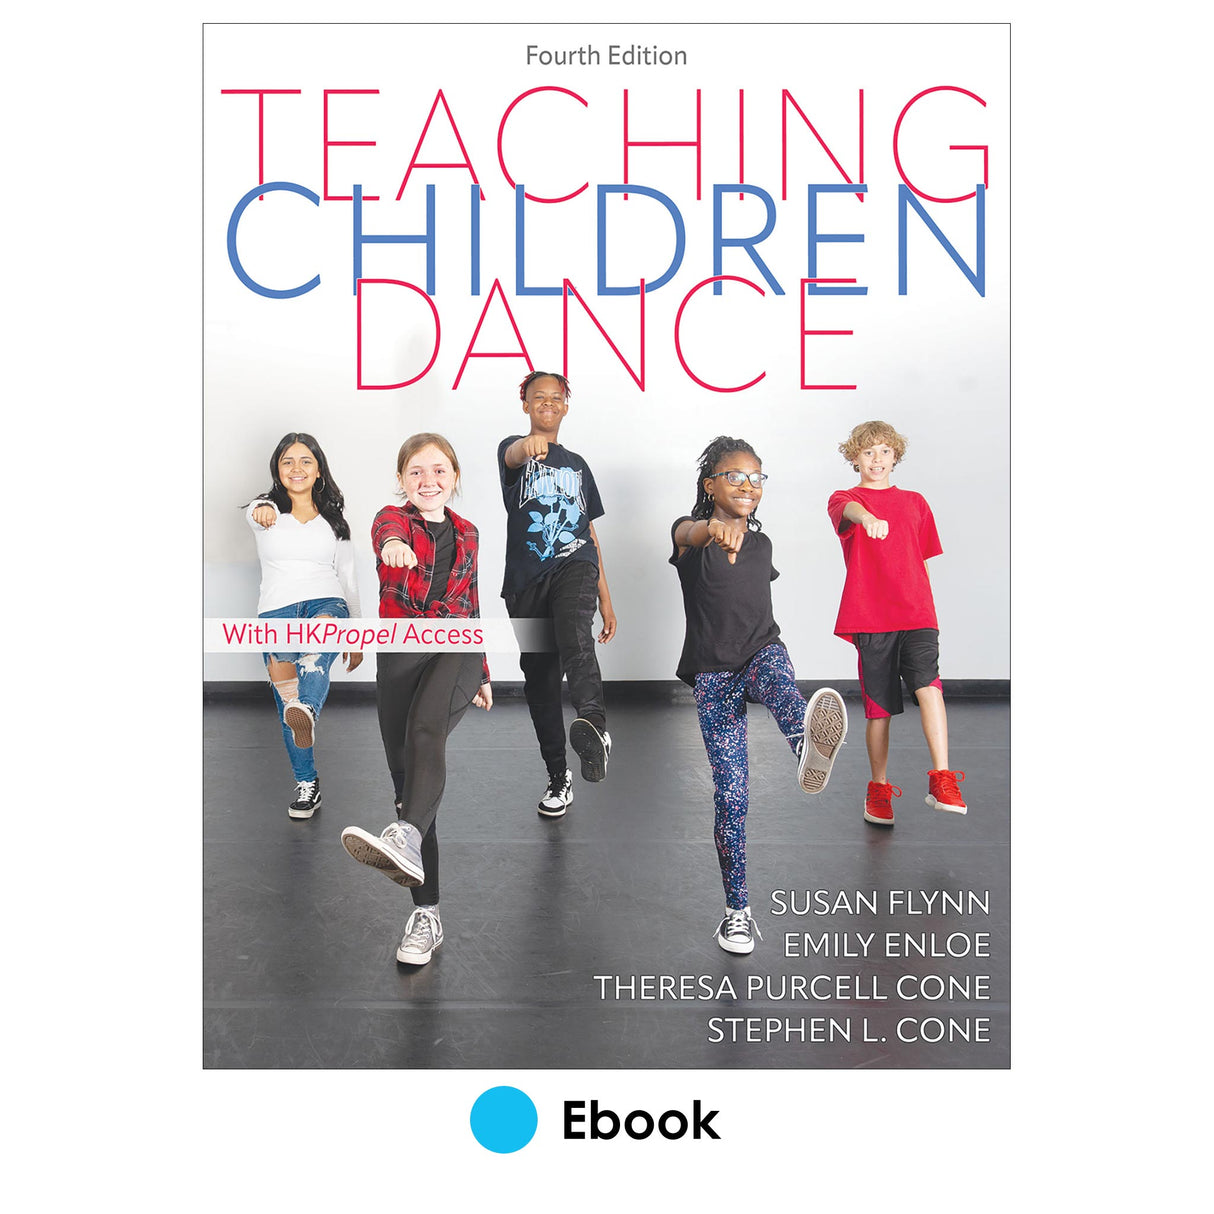 Teaching Children Dance 4th Edition Ebook With HKPropel Access